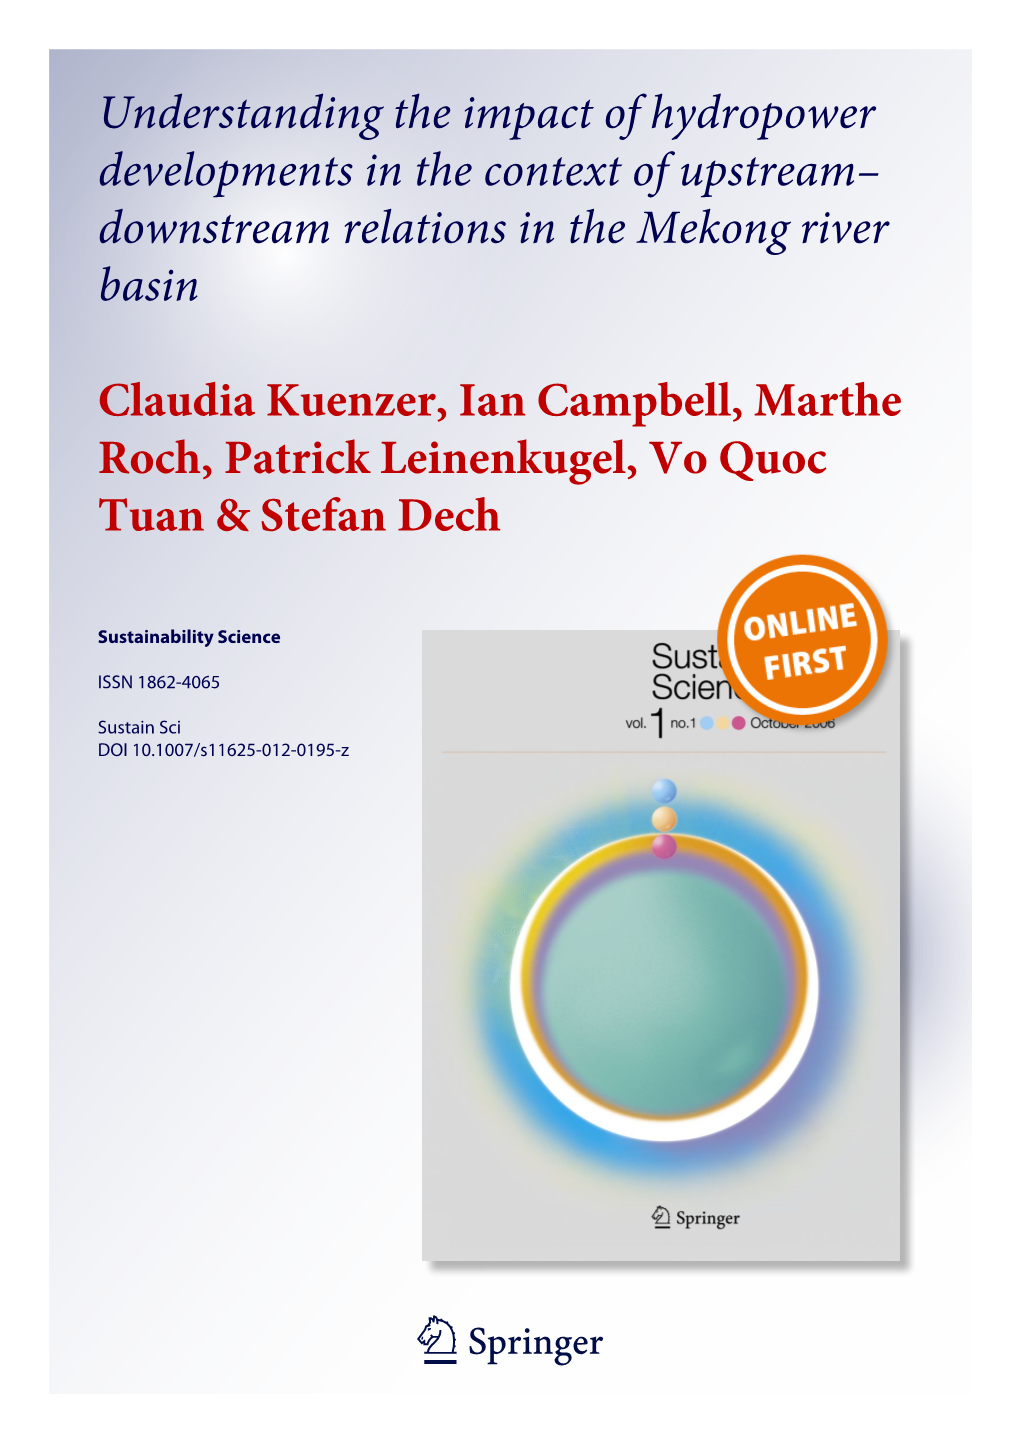 Downstream Relations in the Mekong River Basin